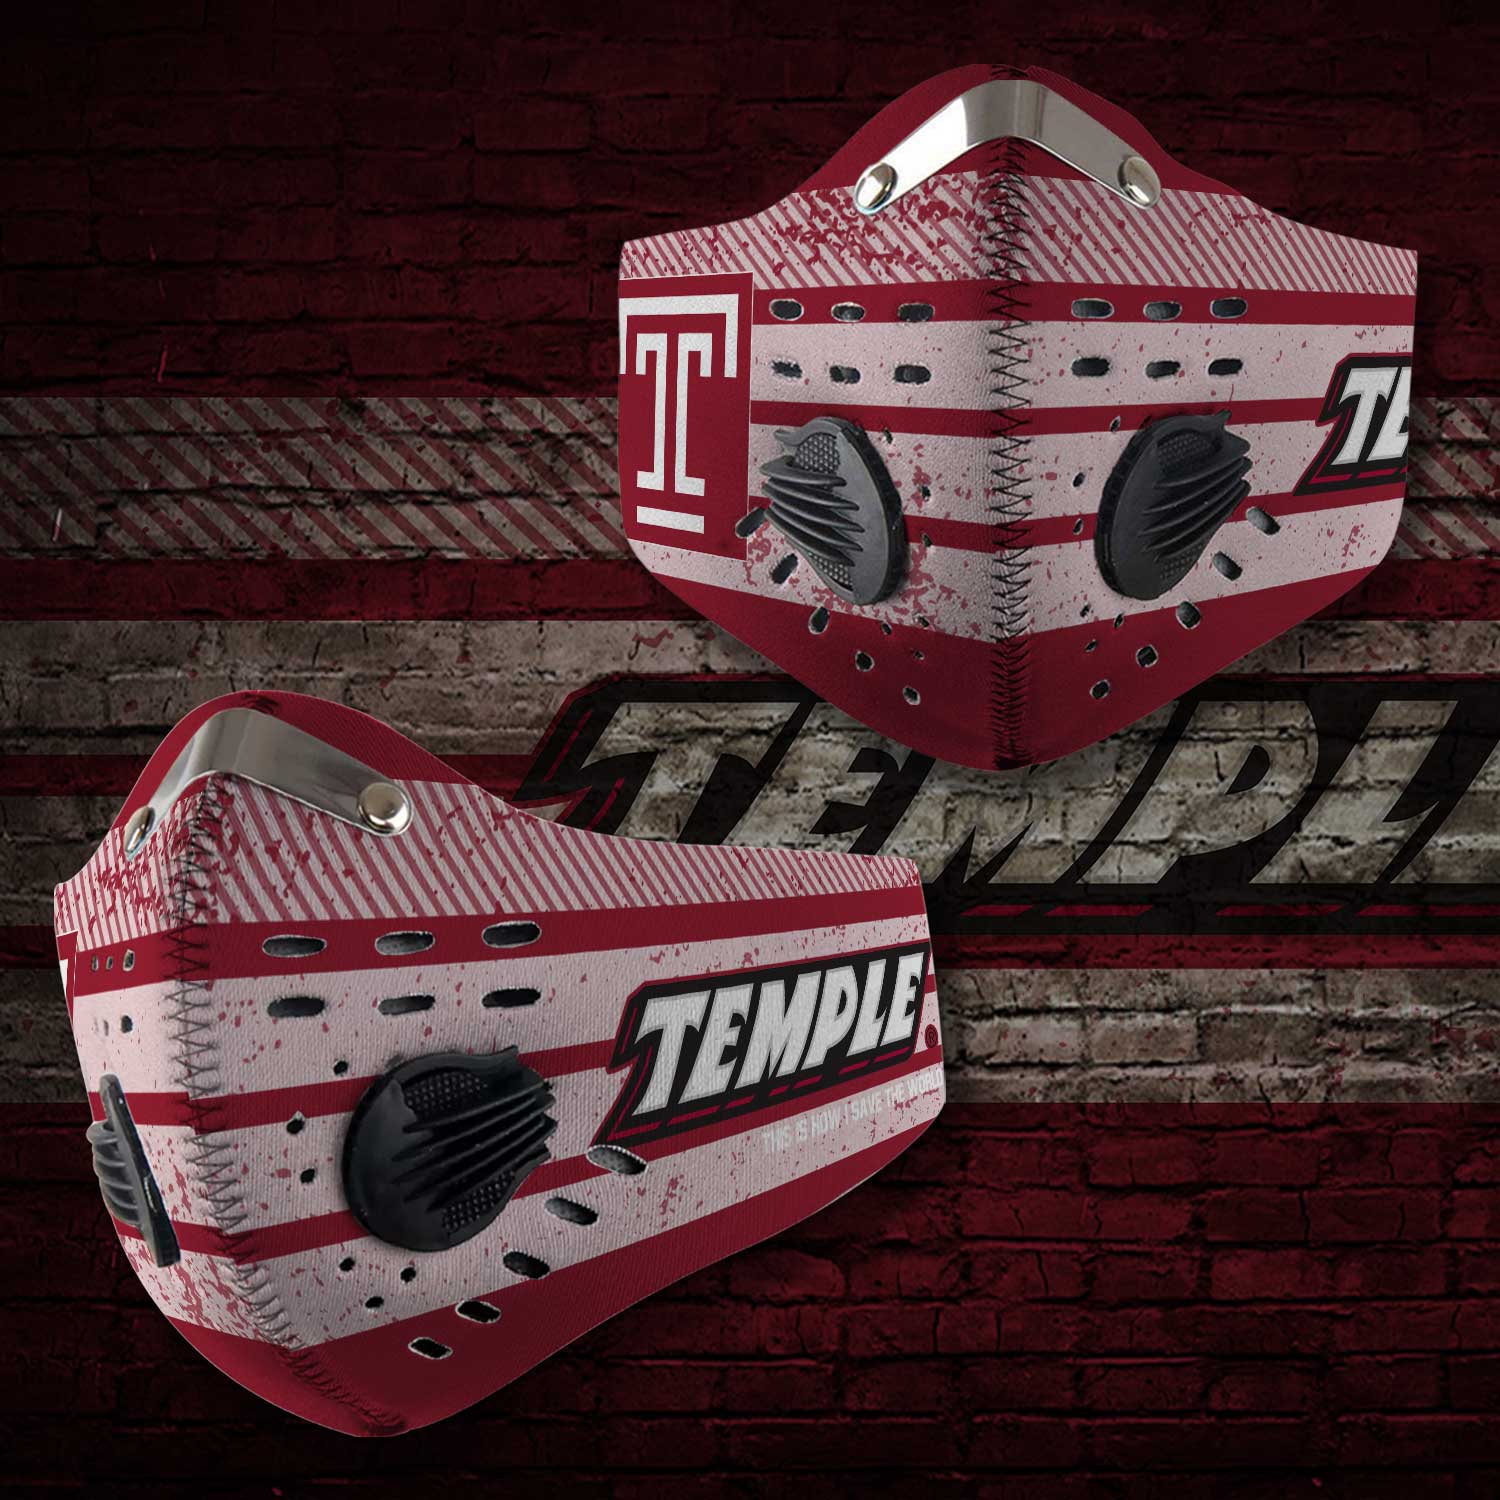 Temple owls this is how i save the world carbon filter face mask